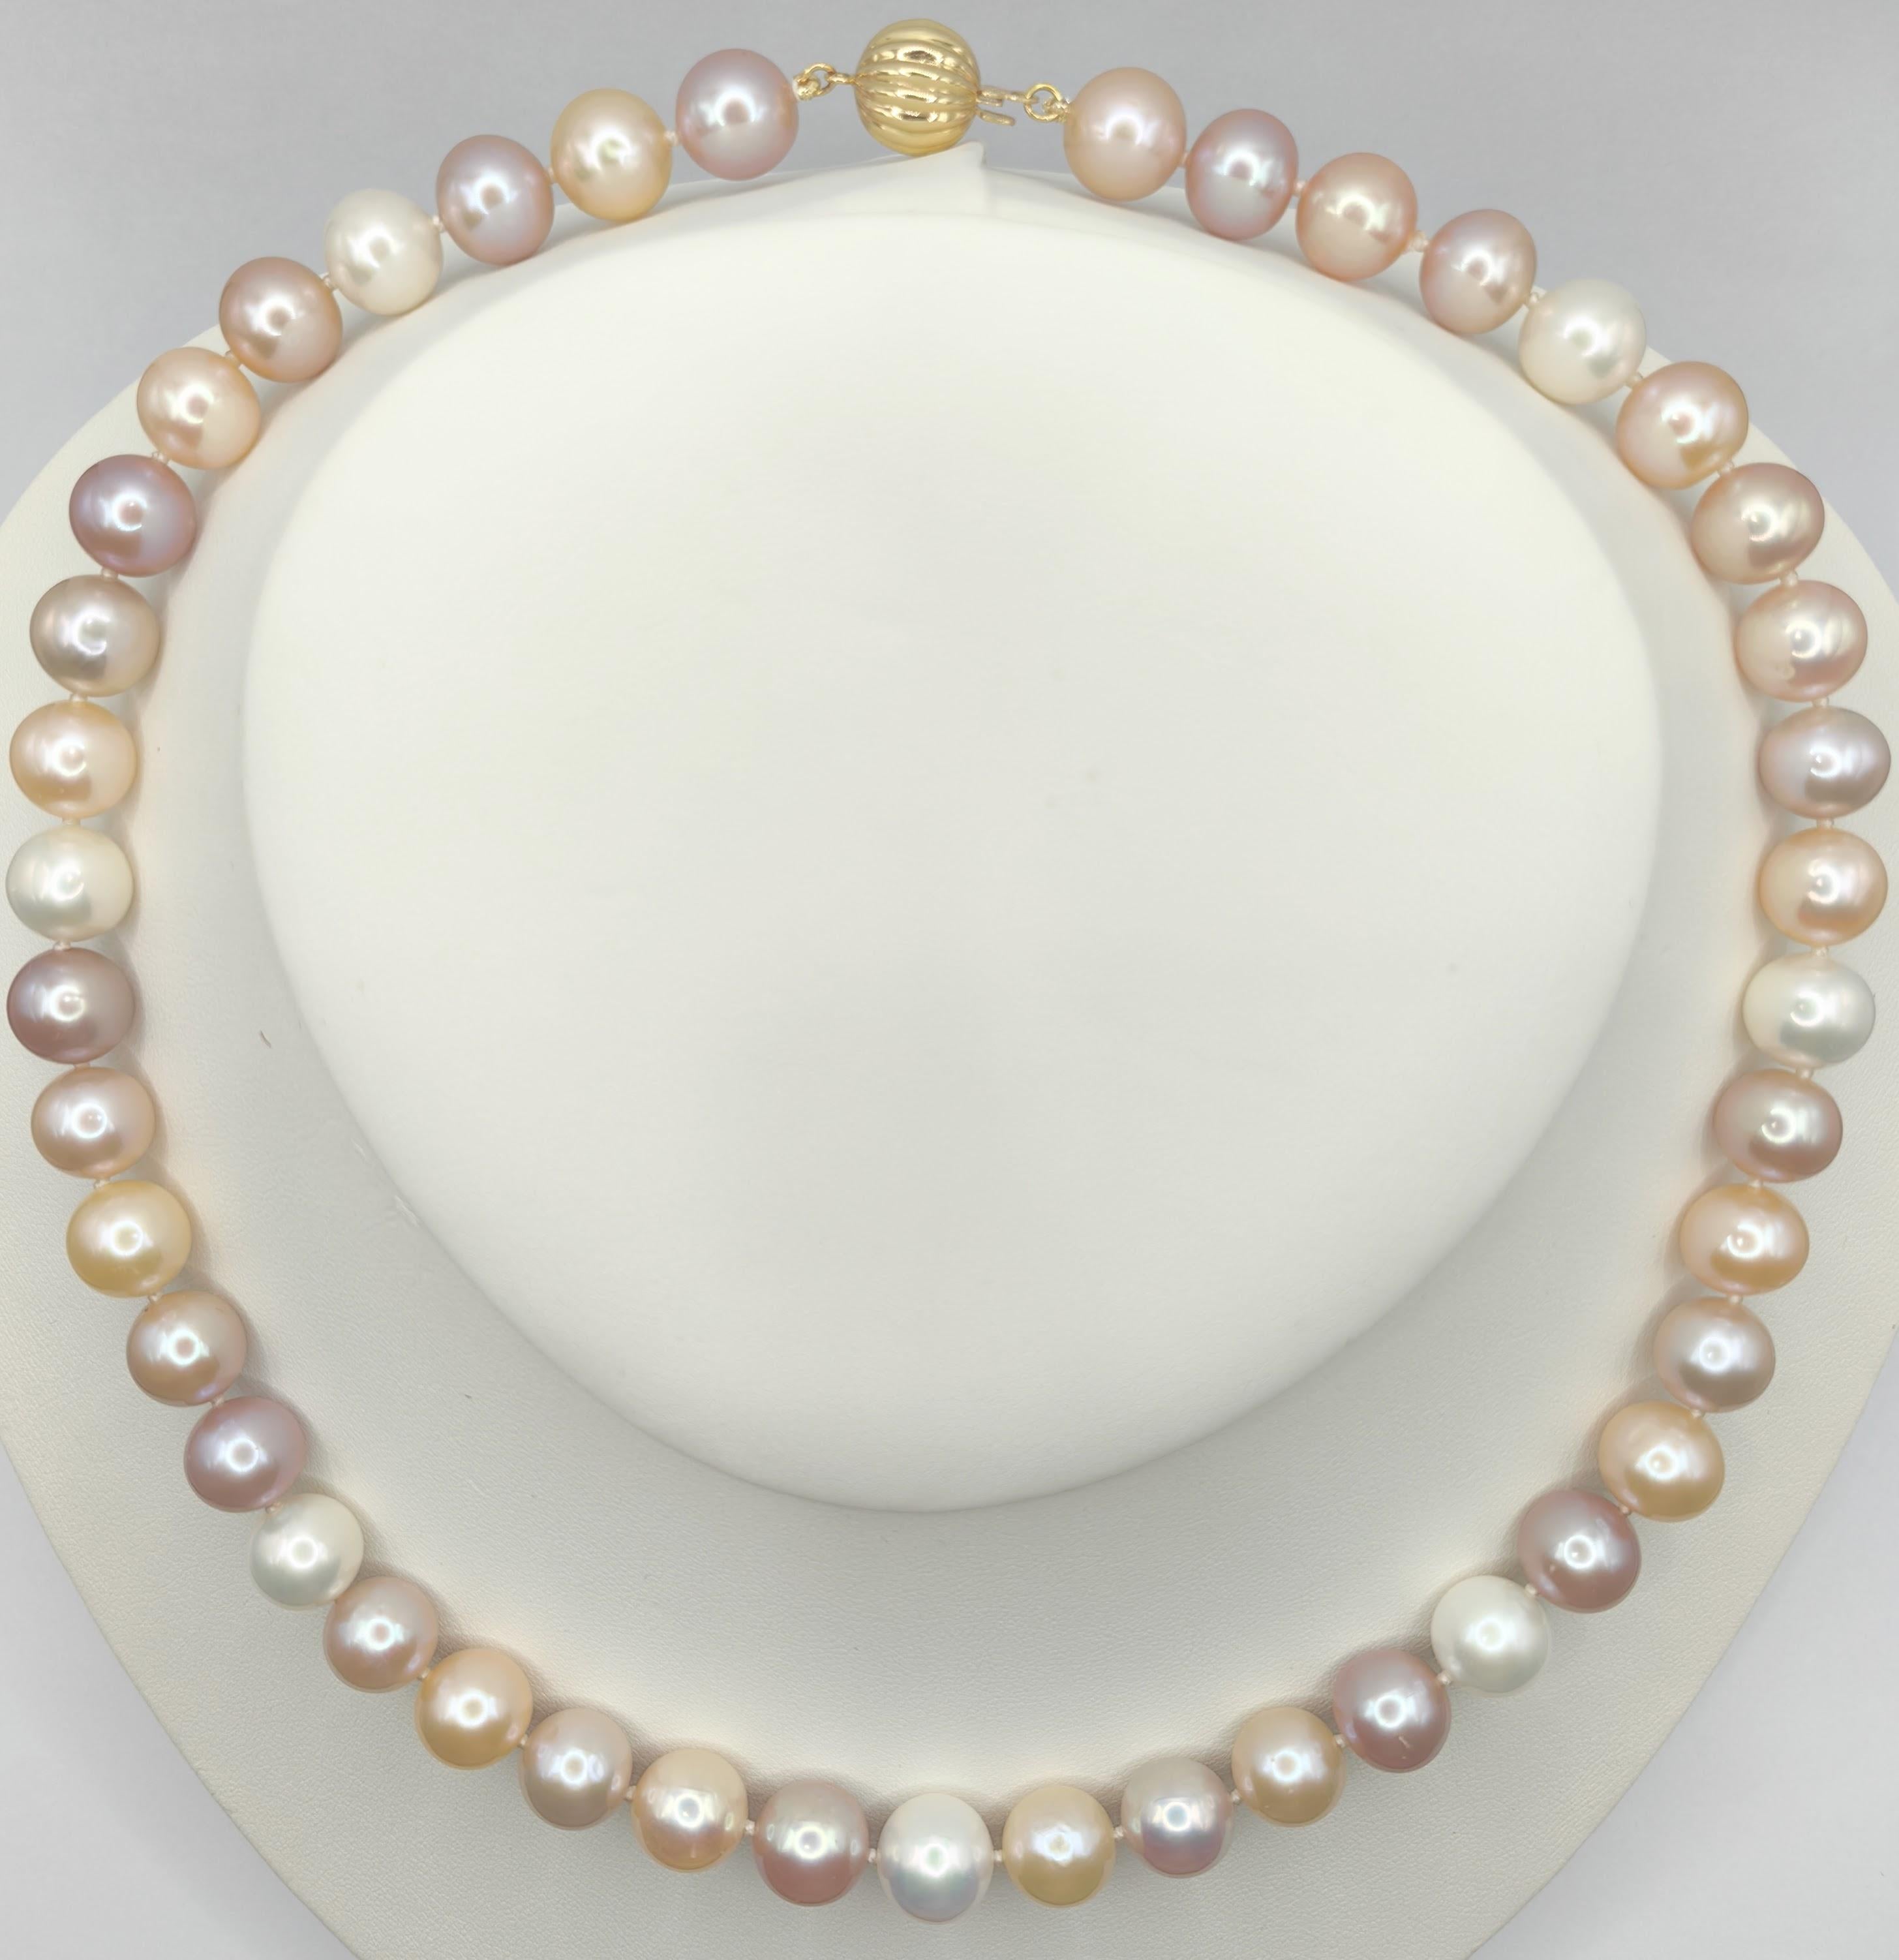 Women's or Men's 9-10mm Candy Pastel Multi-Color Round Pearl Necklace with 18K Gold Clasp For Sale